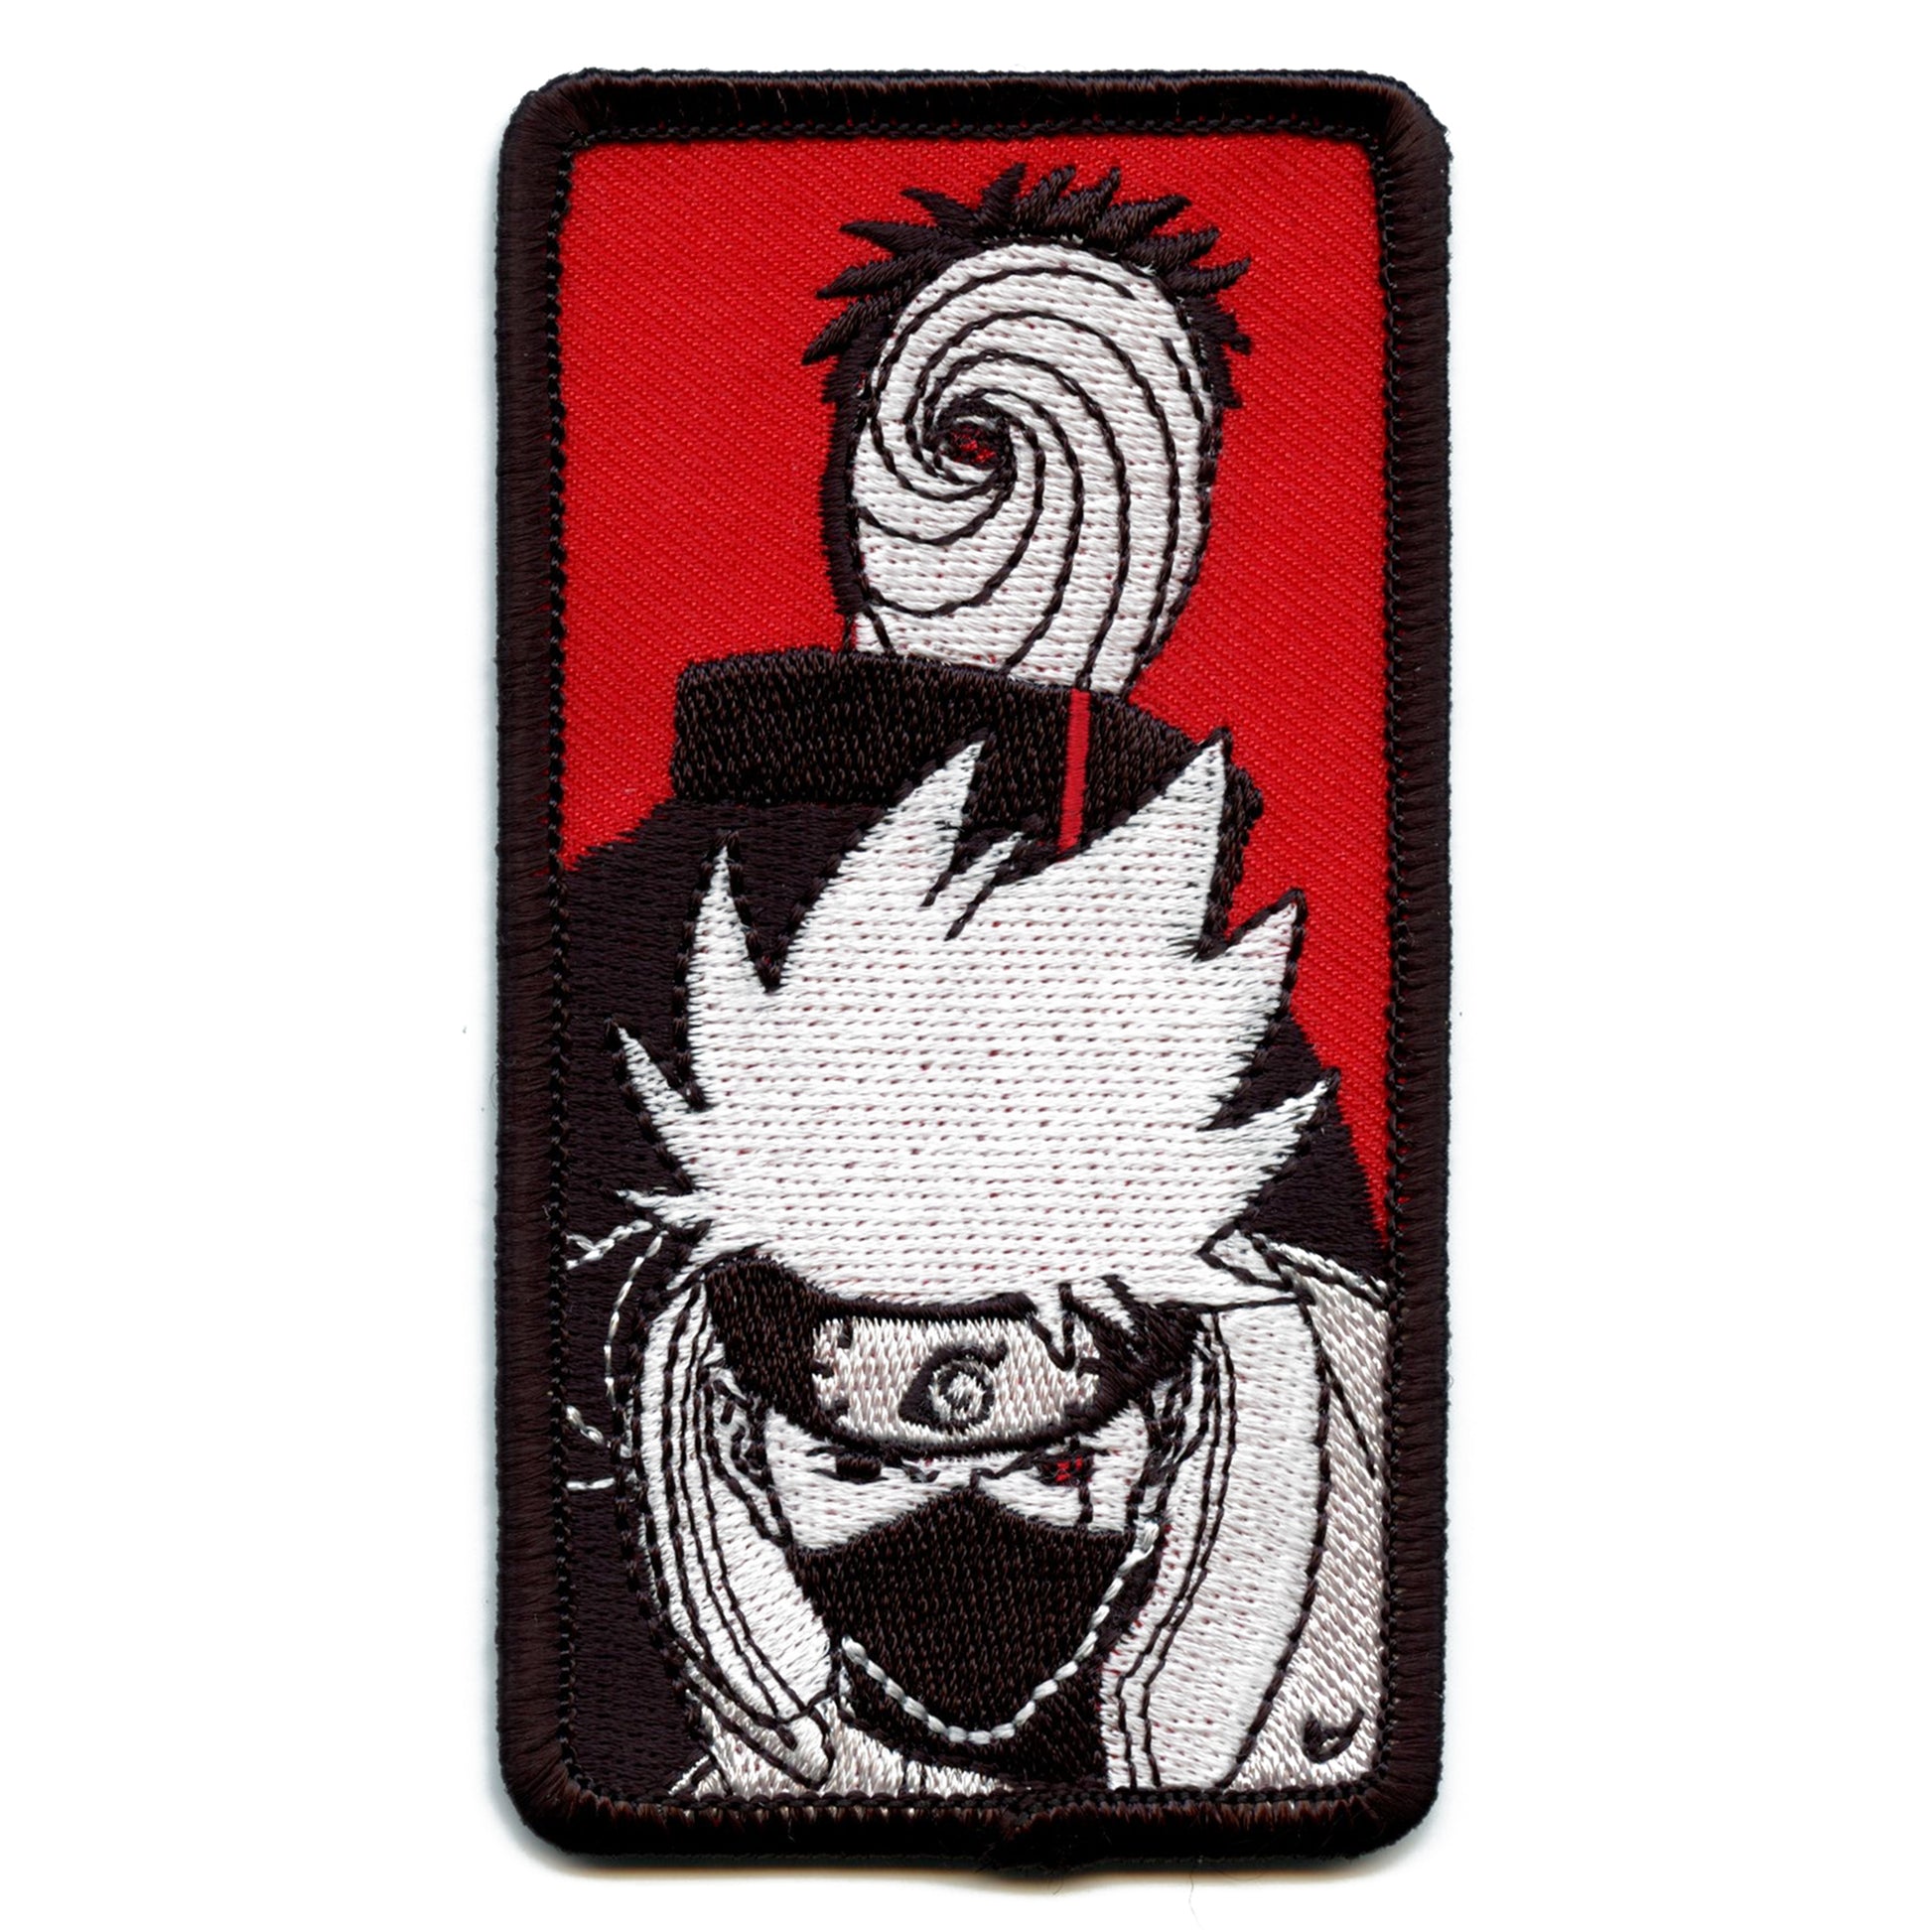 Anime embroidered patch iron on or velcro